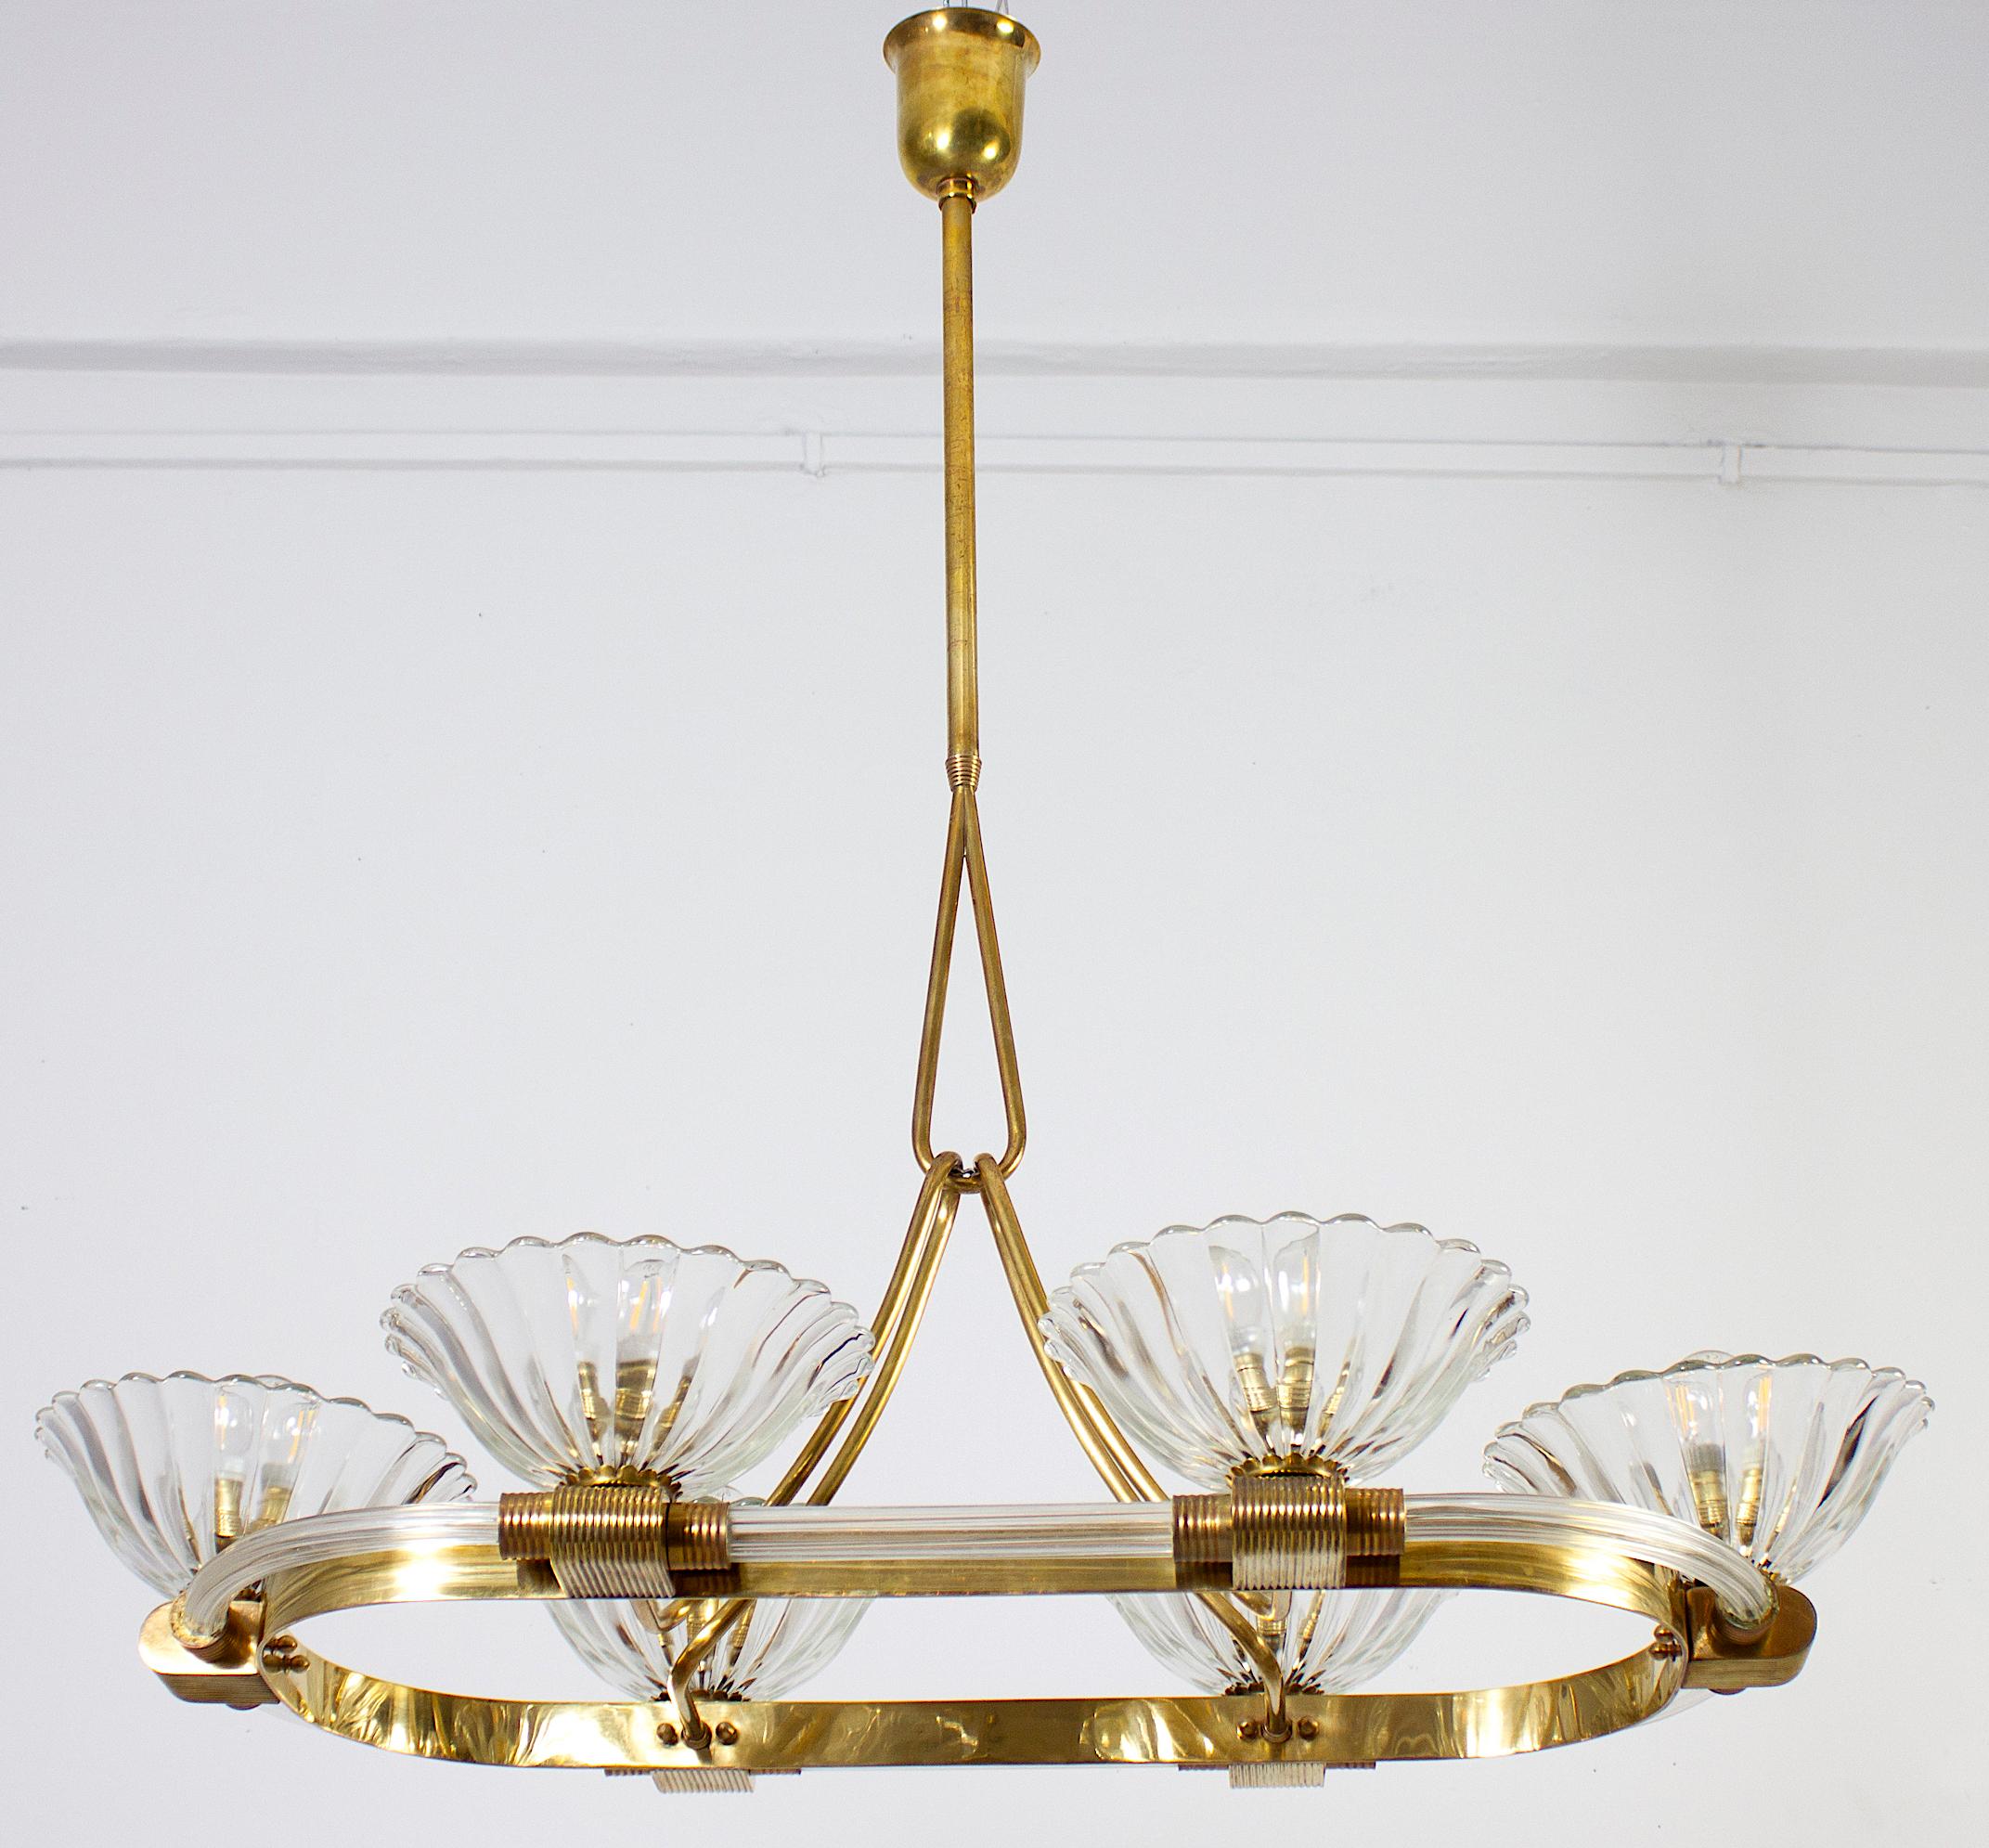  Art Deco Oval Shape Brass and Murano Glass Chandelier by Ercole Barovier 1940 For Sale 5